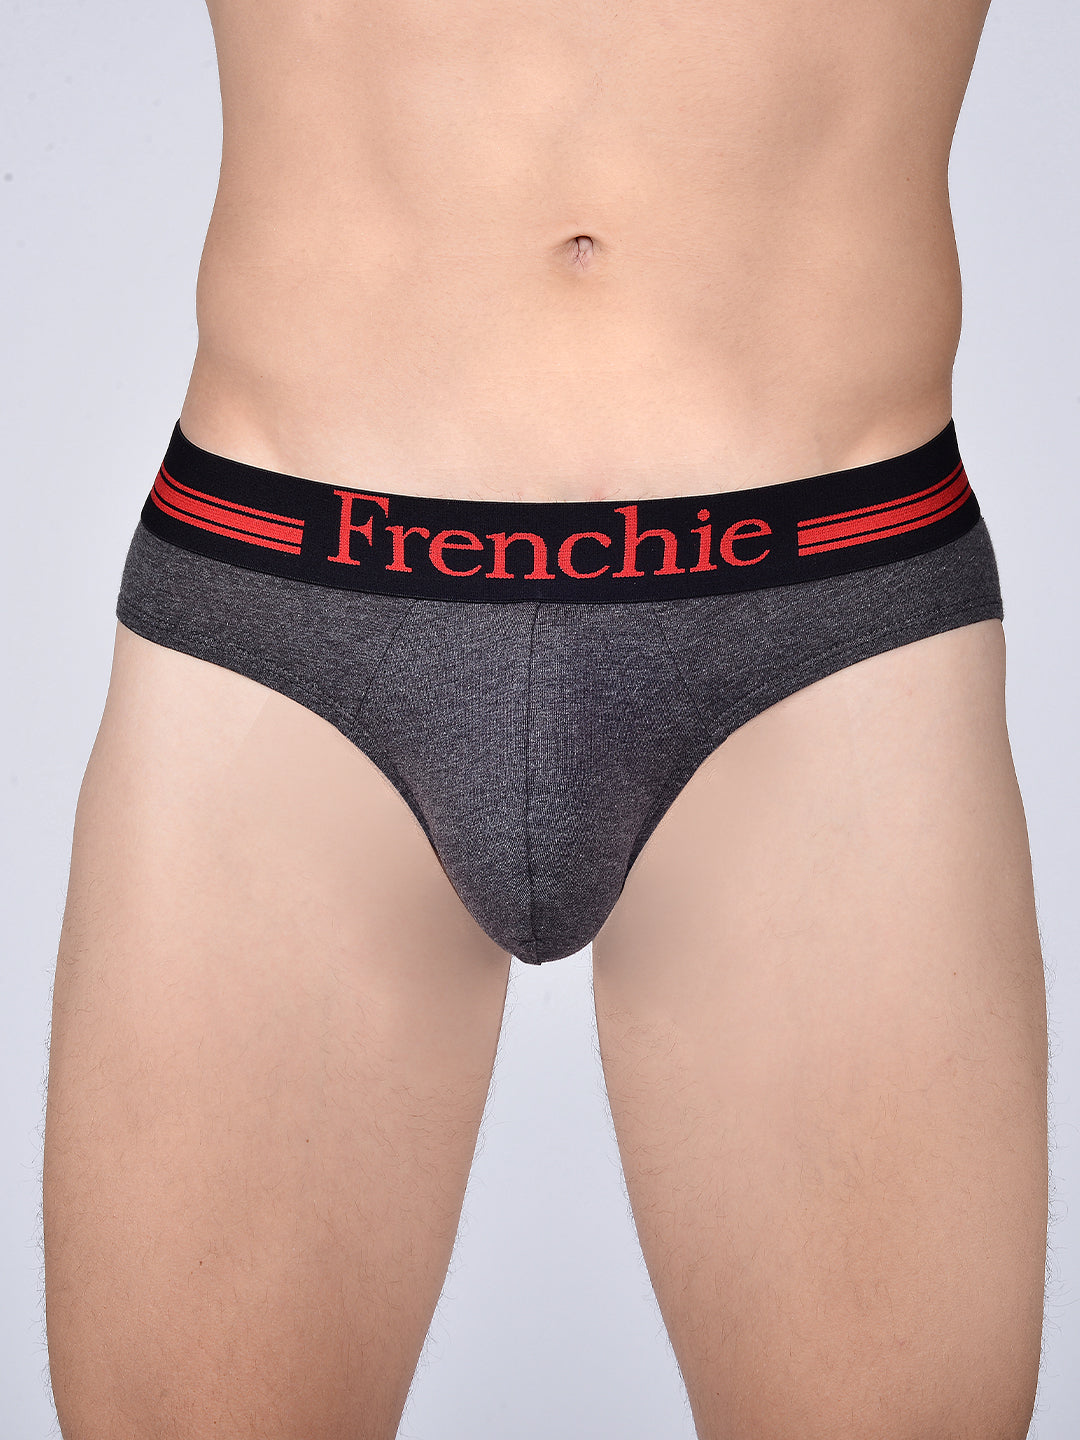 Frenchie Mens Casual-4001 Brief Assorted Colors